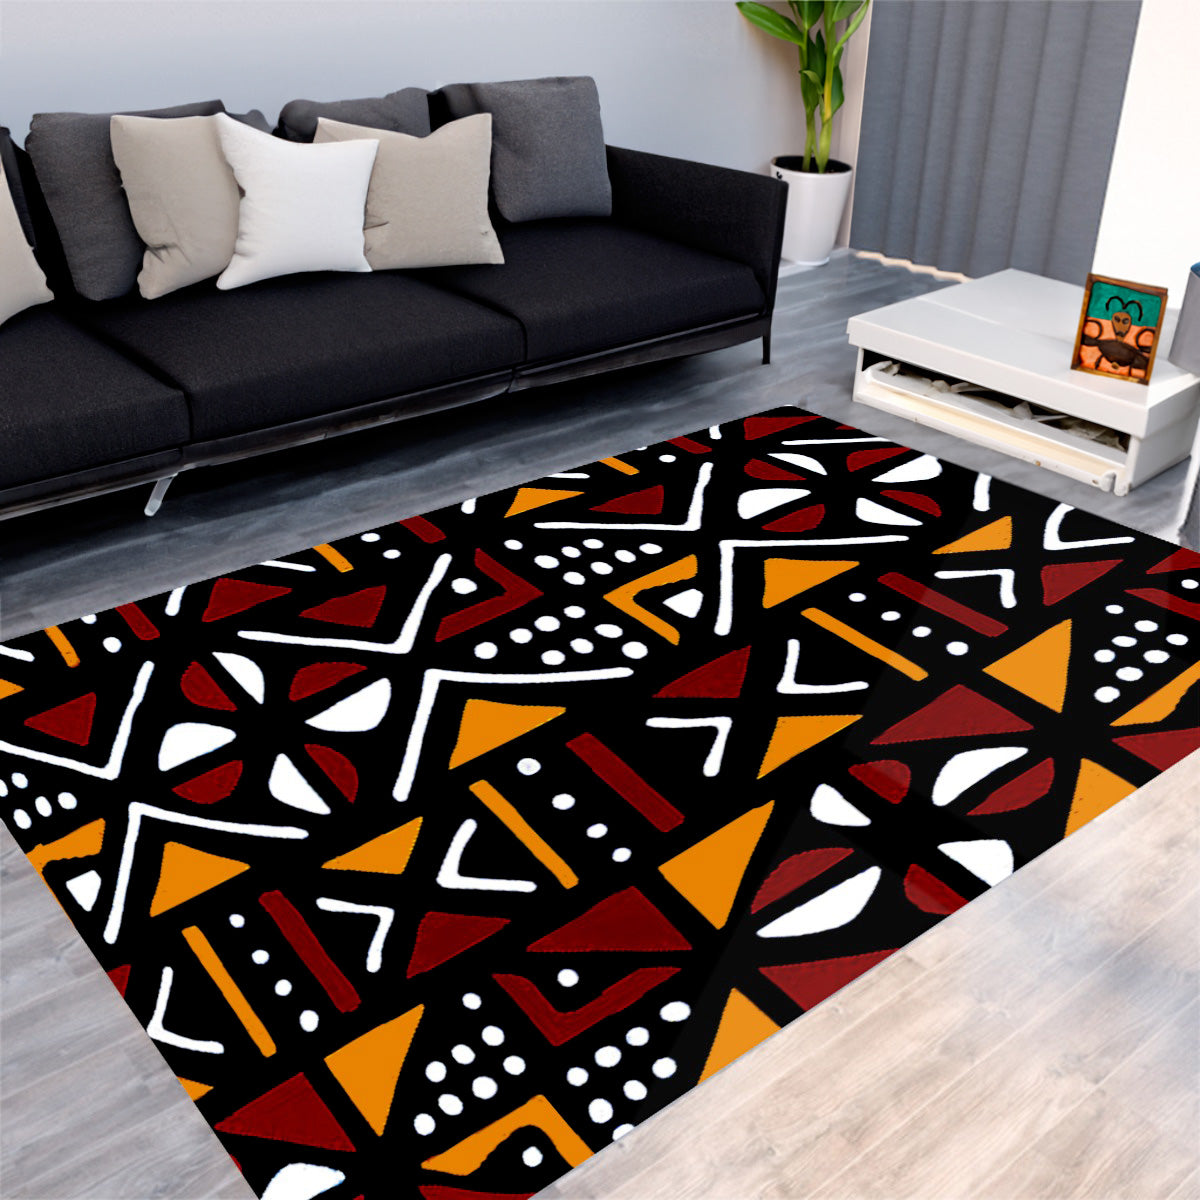 African Mudcloth Print Carpet: Traditional Floor Artistry